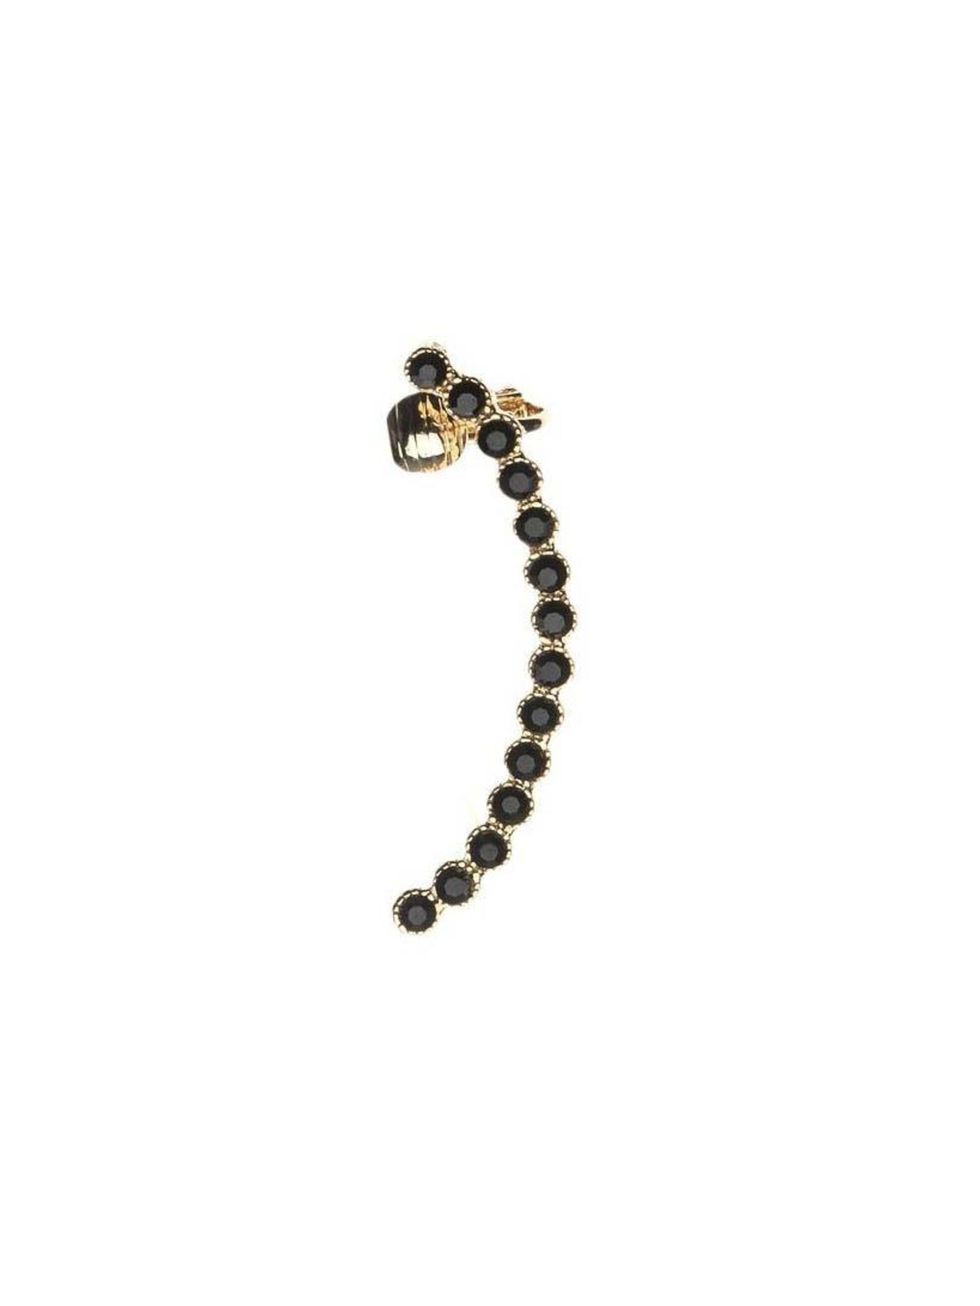 <p>Sub-Editor Claire Sibbick is taking this ear cuff for a test drive.</p>

<p><a href="http://www.orelia.co.uk/new/large-simple-stone-ear-cuff.html" target="_blank">Orelia</a> ear cuff, £22</p>